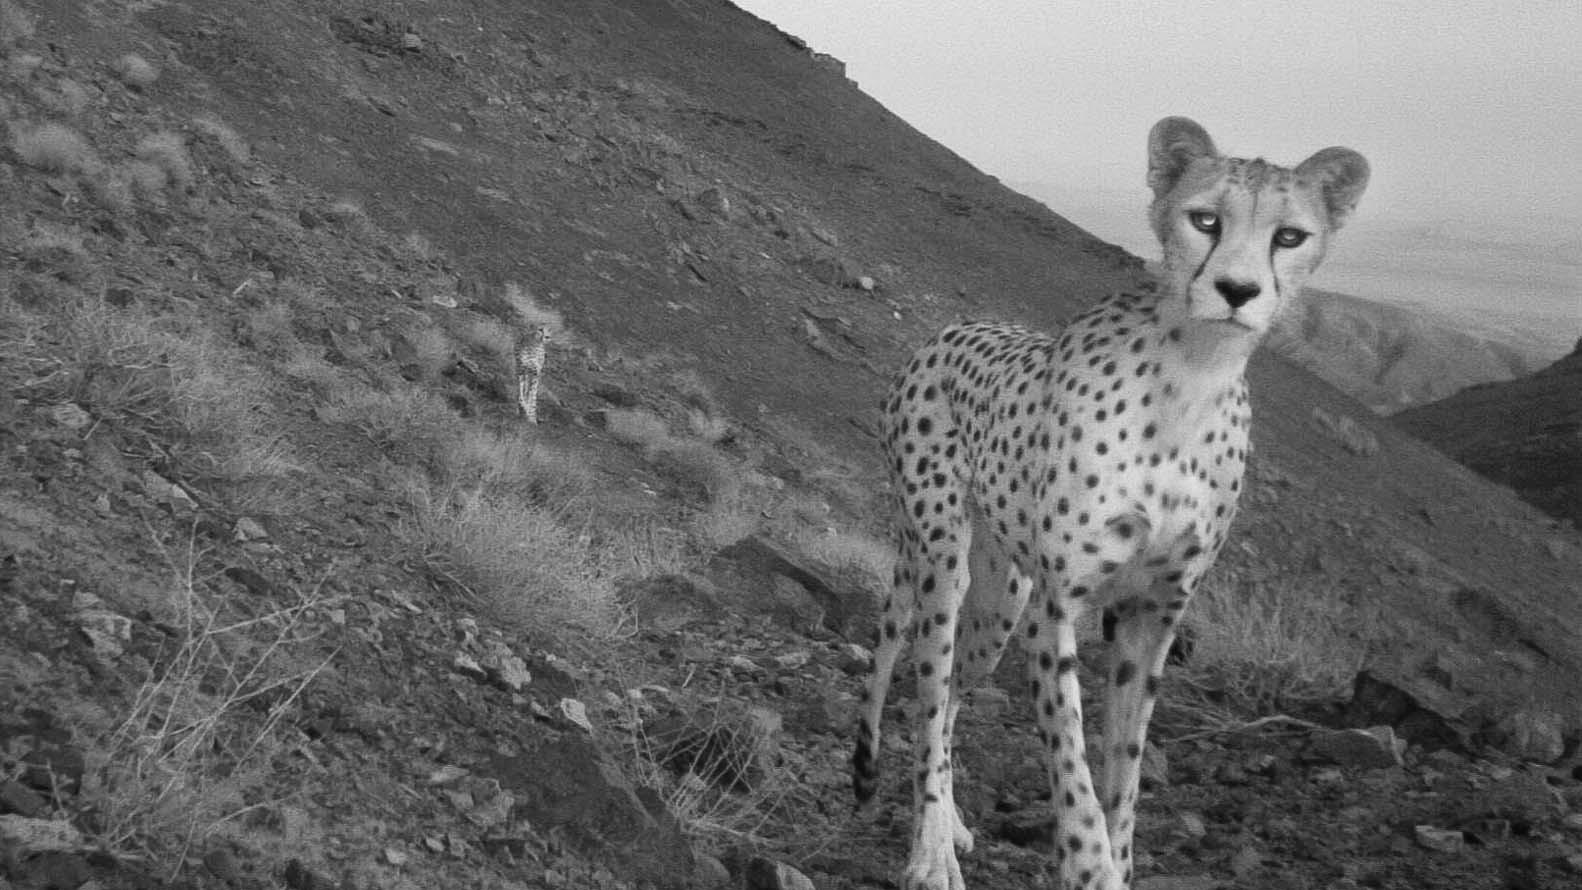 A black and white photo of a cheetah with mountainous terrain behind